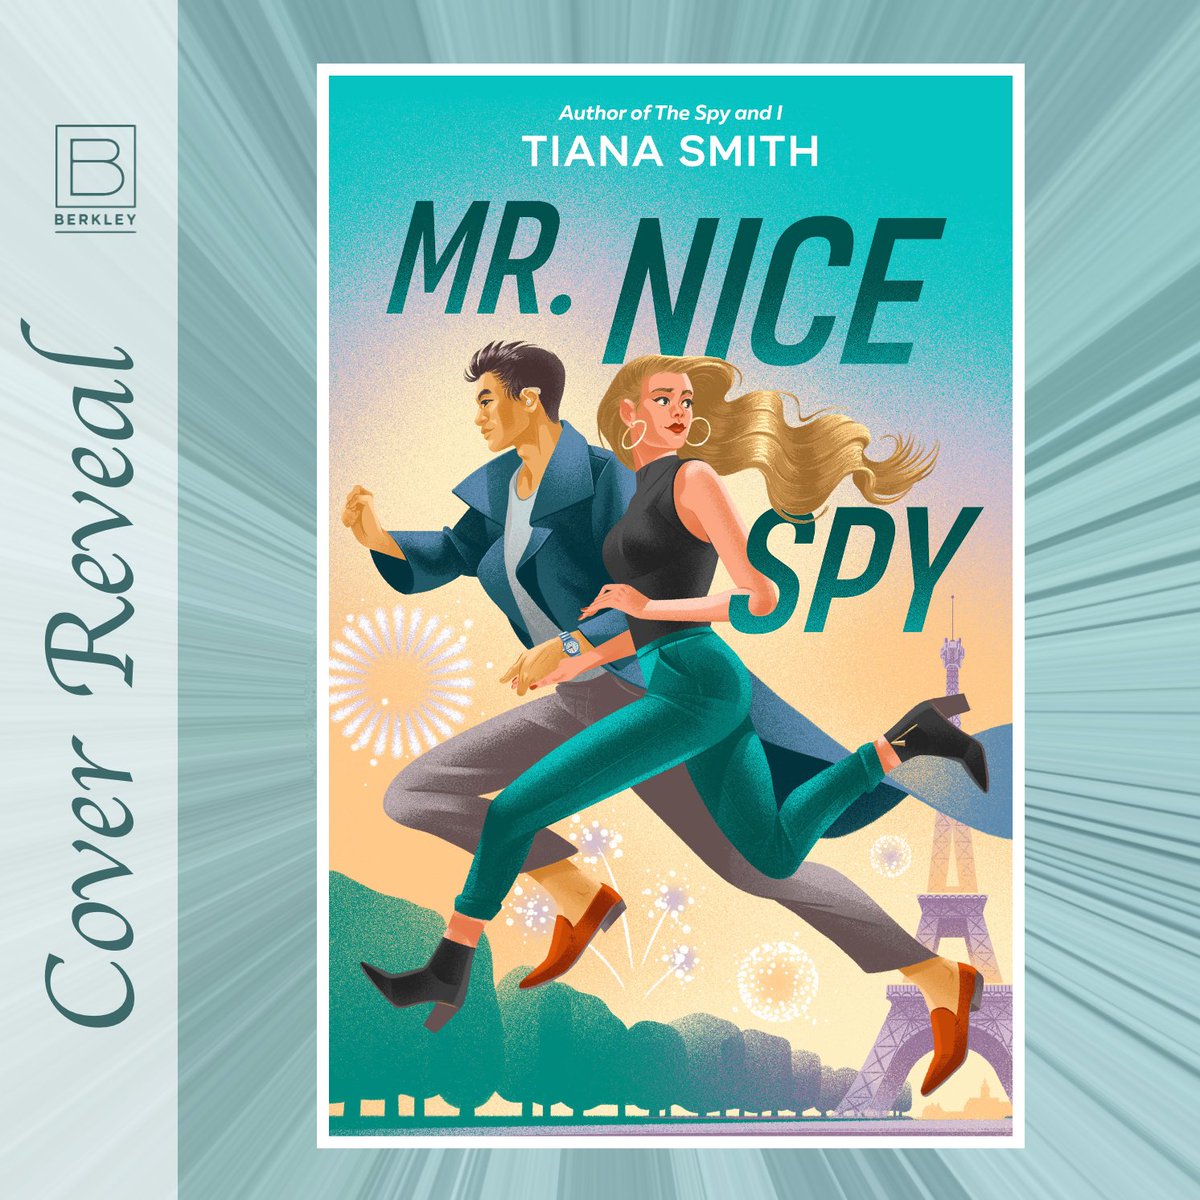 It's cover reveal day for MR. NICE SPY! Read what it's about and add it on Goodreads here: bit.ly/nicespyGR